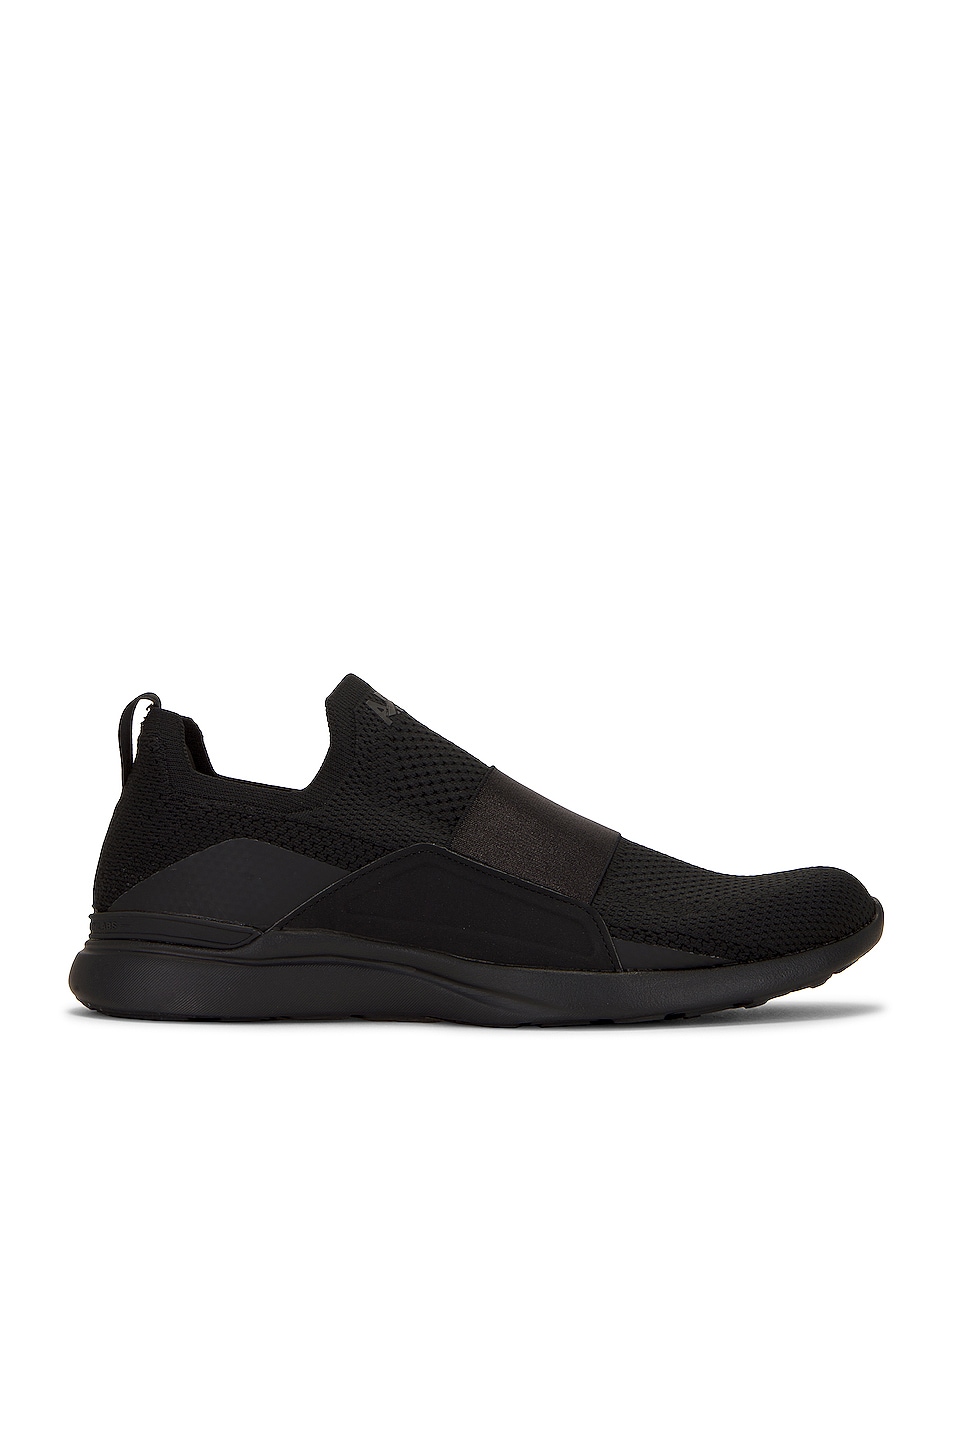 Image 1 of APL: Athletic Propulsion Labs Techloom Bliss in Black